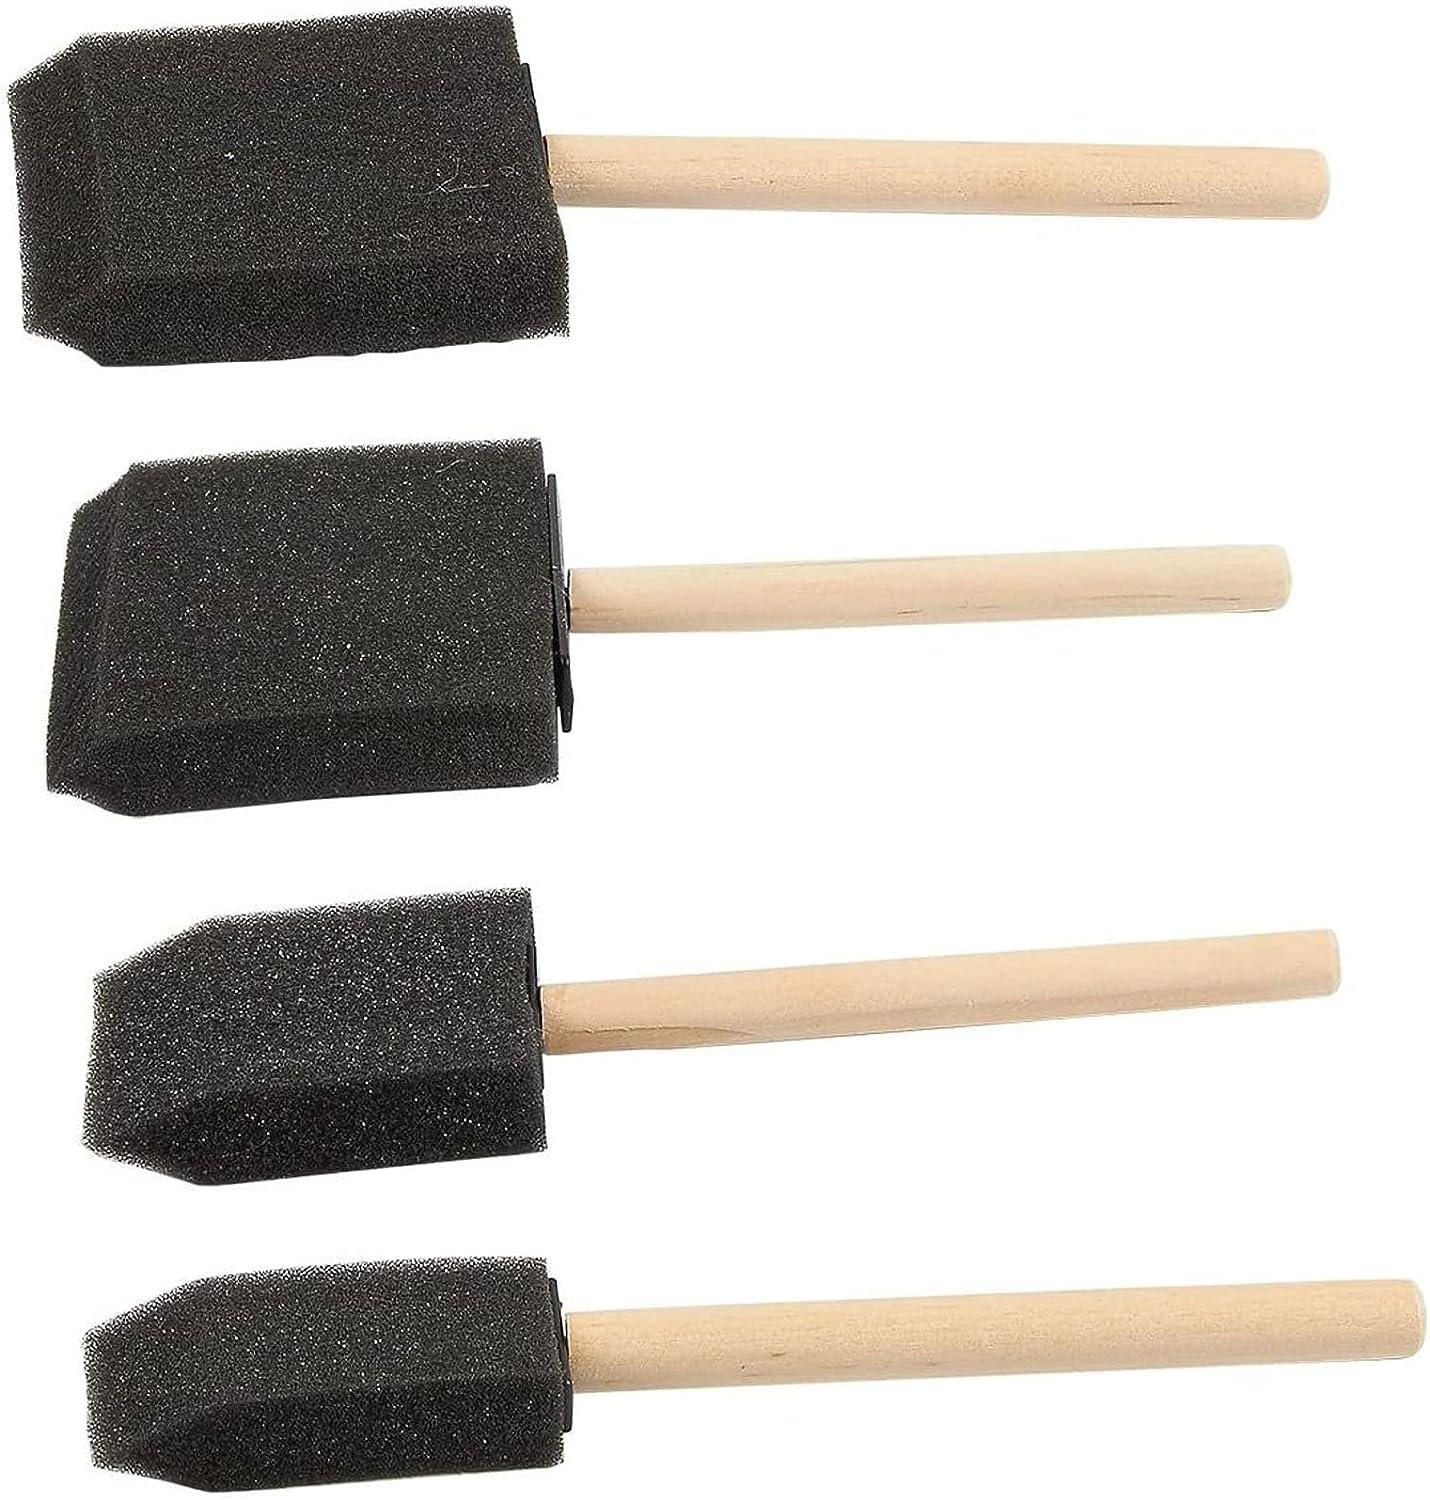 20 Pack Foam Paint Brushes - Bulk Arts & Crafts Supplies with 4